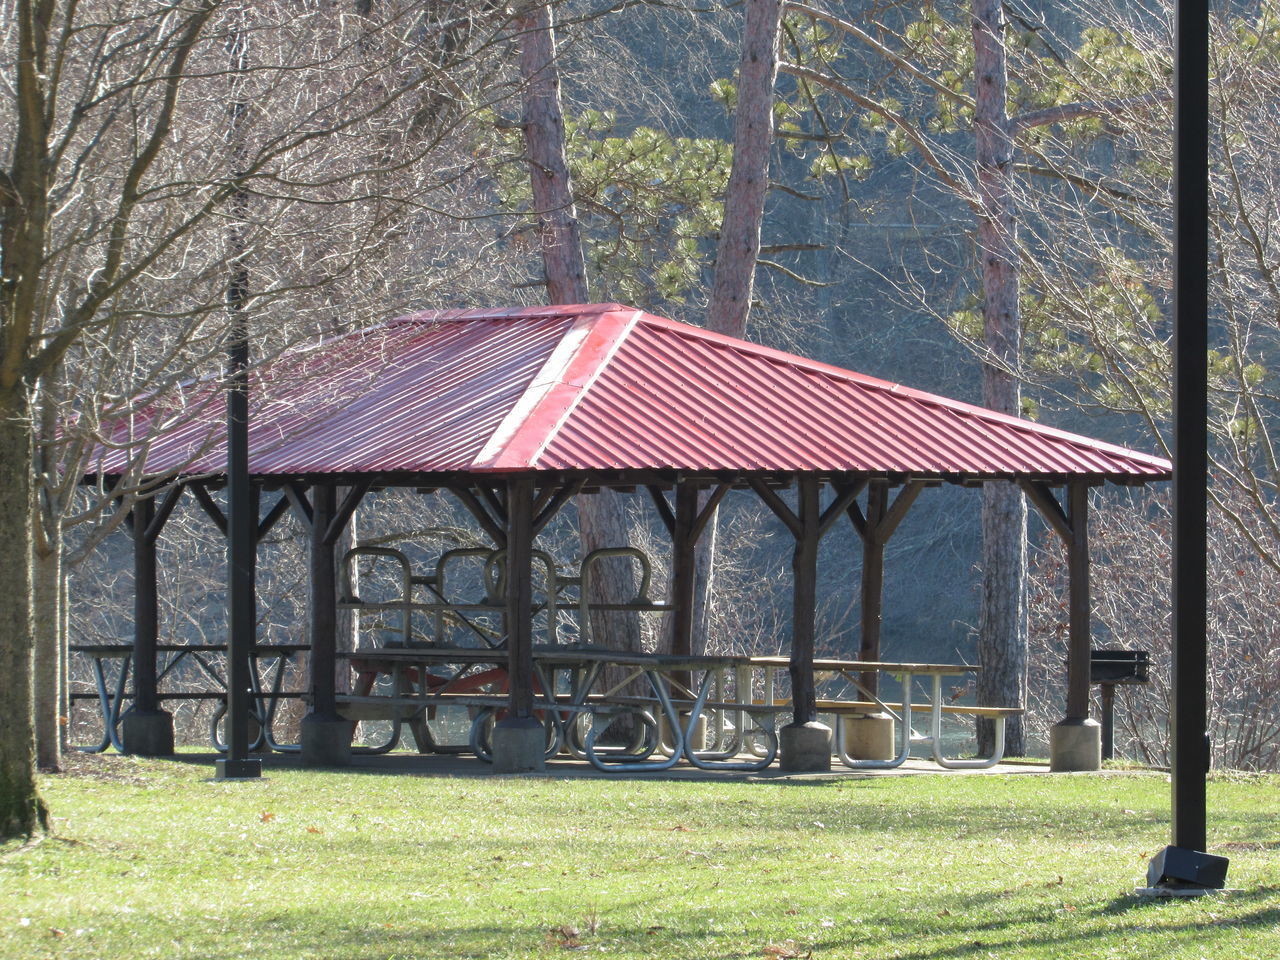 BUILT STRUCTURE ON FIELD AGAINST TREES